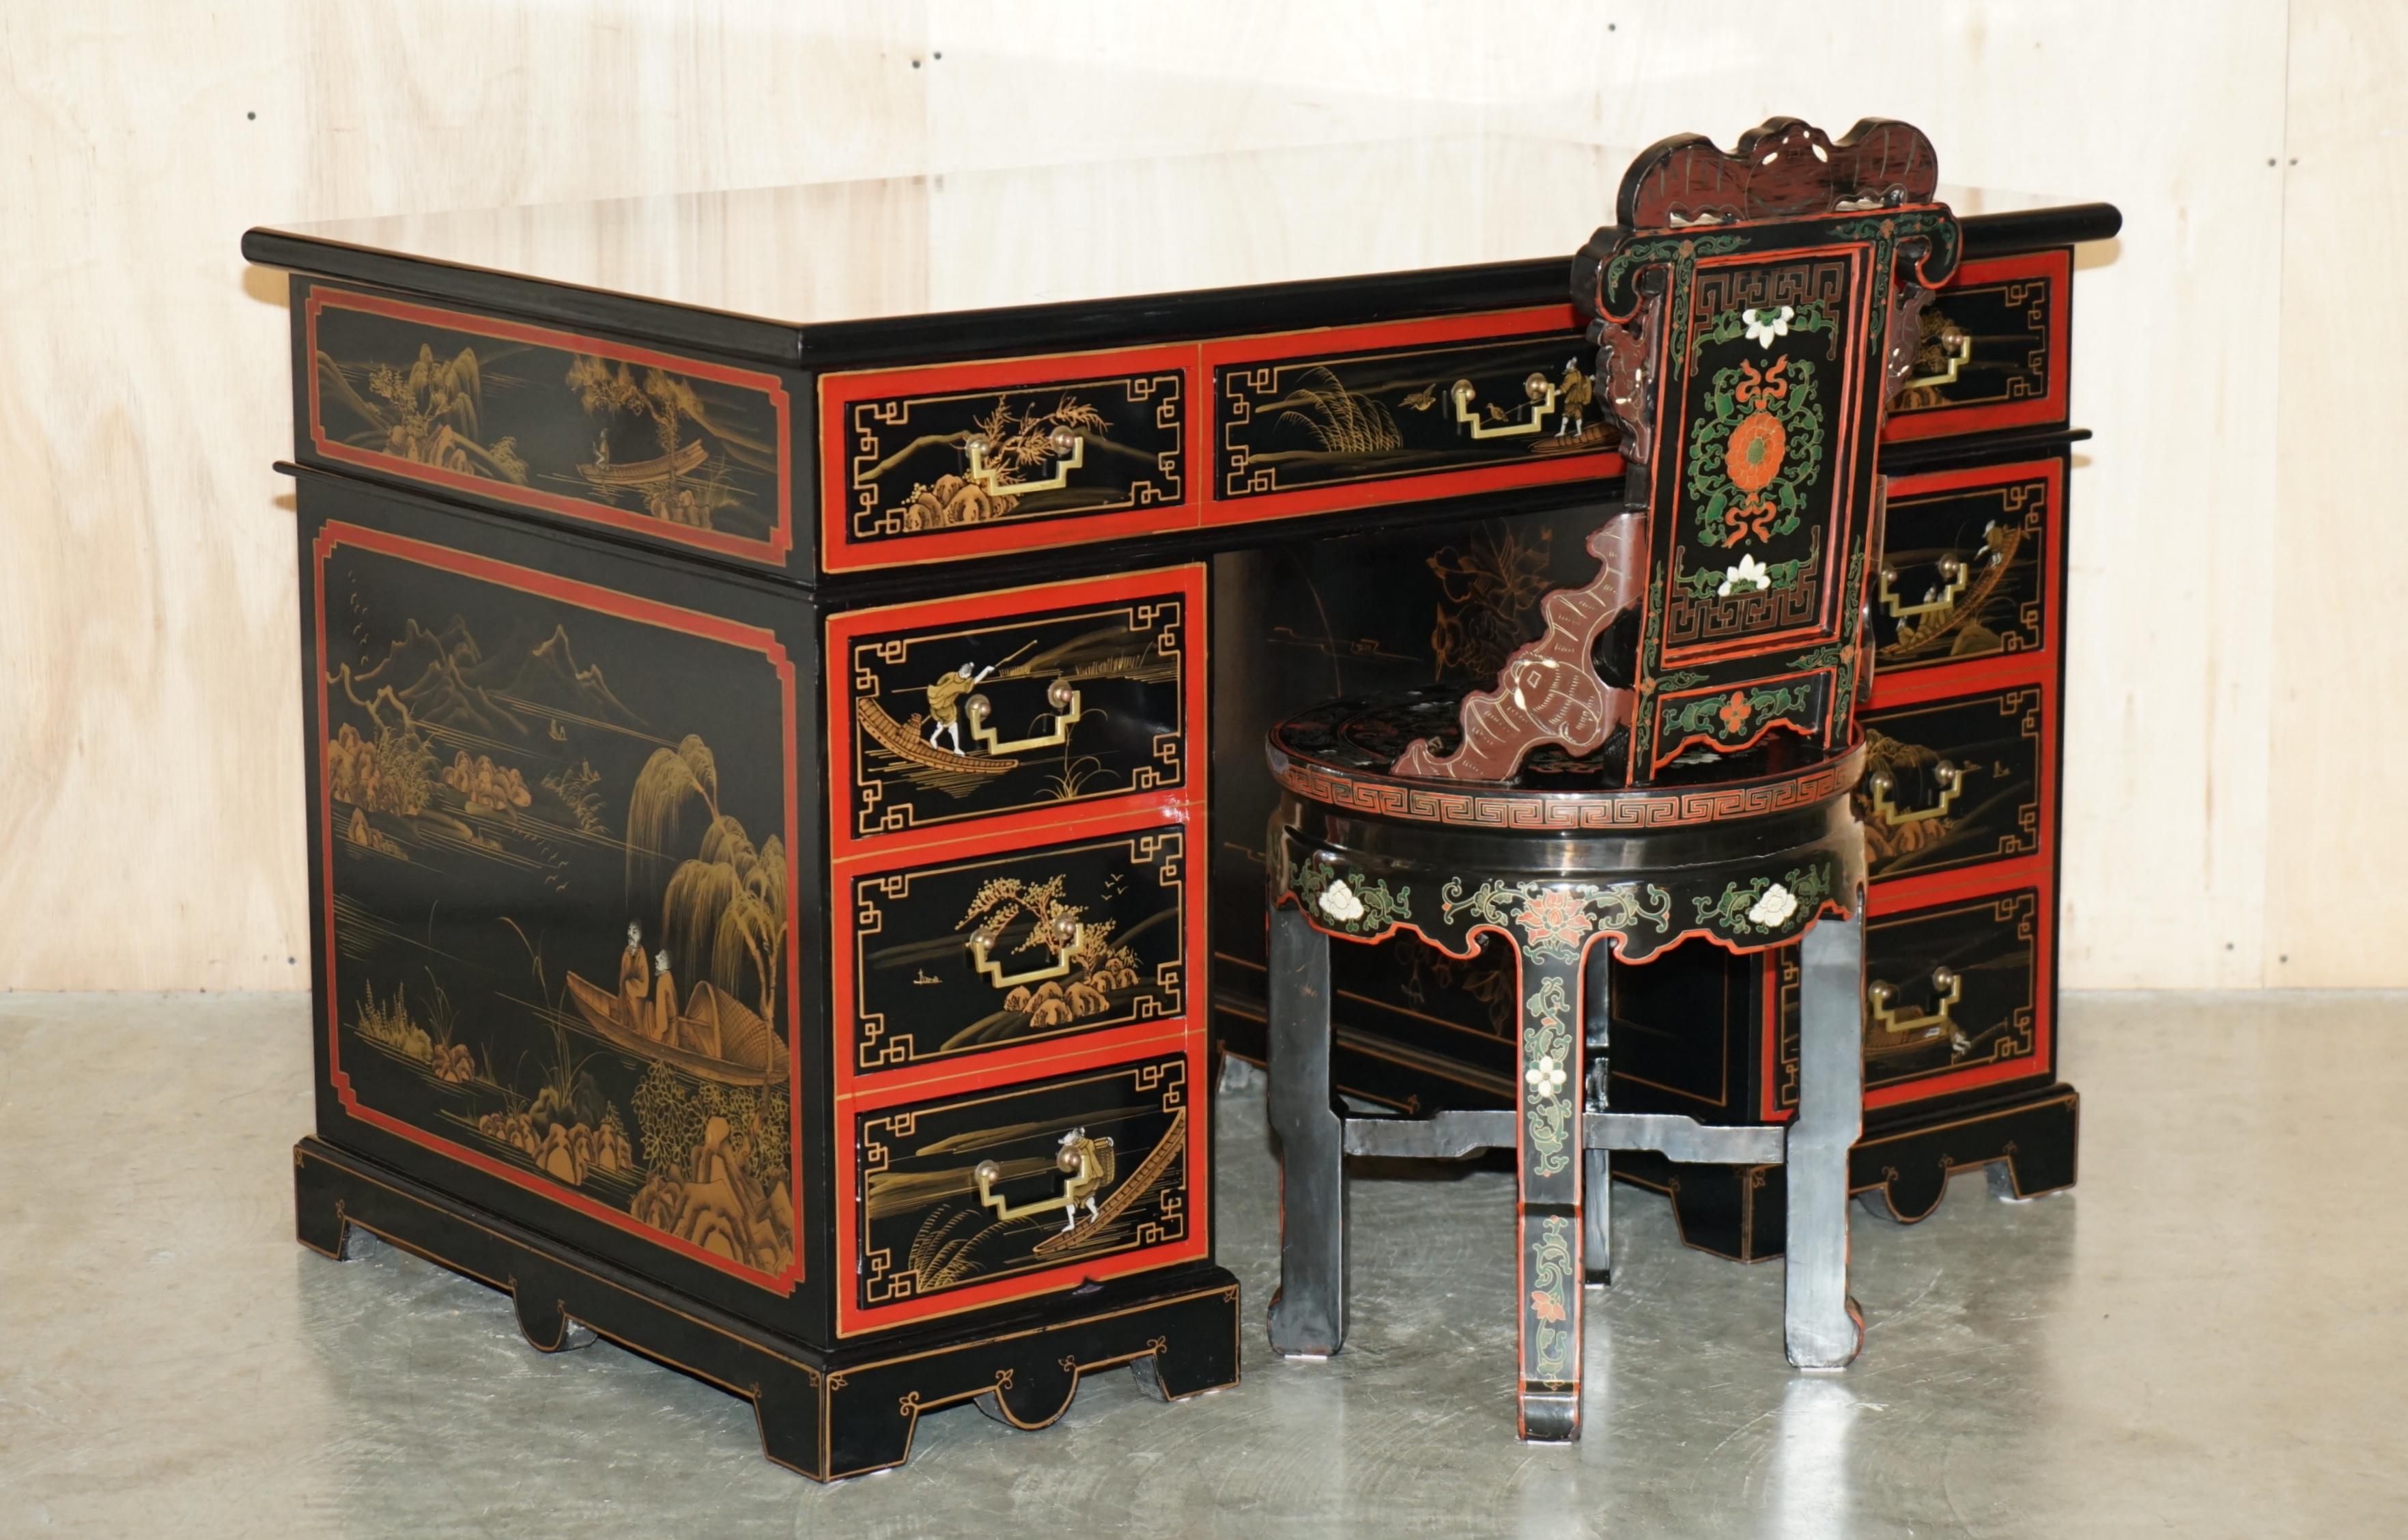 Royal House Antiques

Royal House Antiques is delighted to offer for sale this lovely vintage Chinese Chinoiserie decorated twin pedestal desk and matching chair which have both been ornately painted and lacquered 

Please note the delivery fee